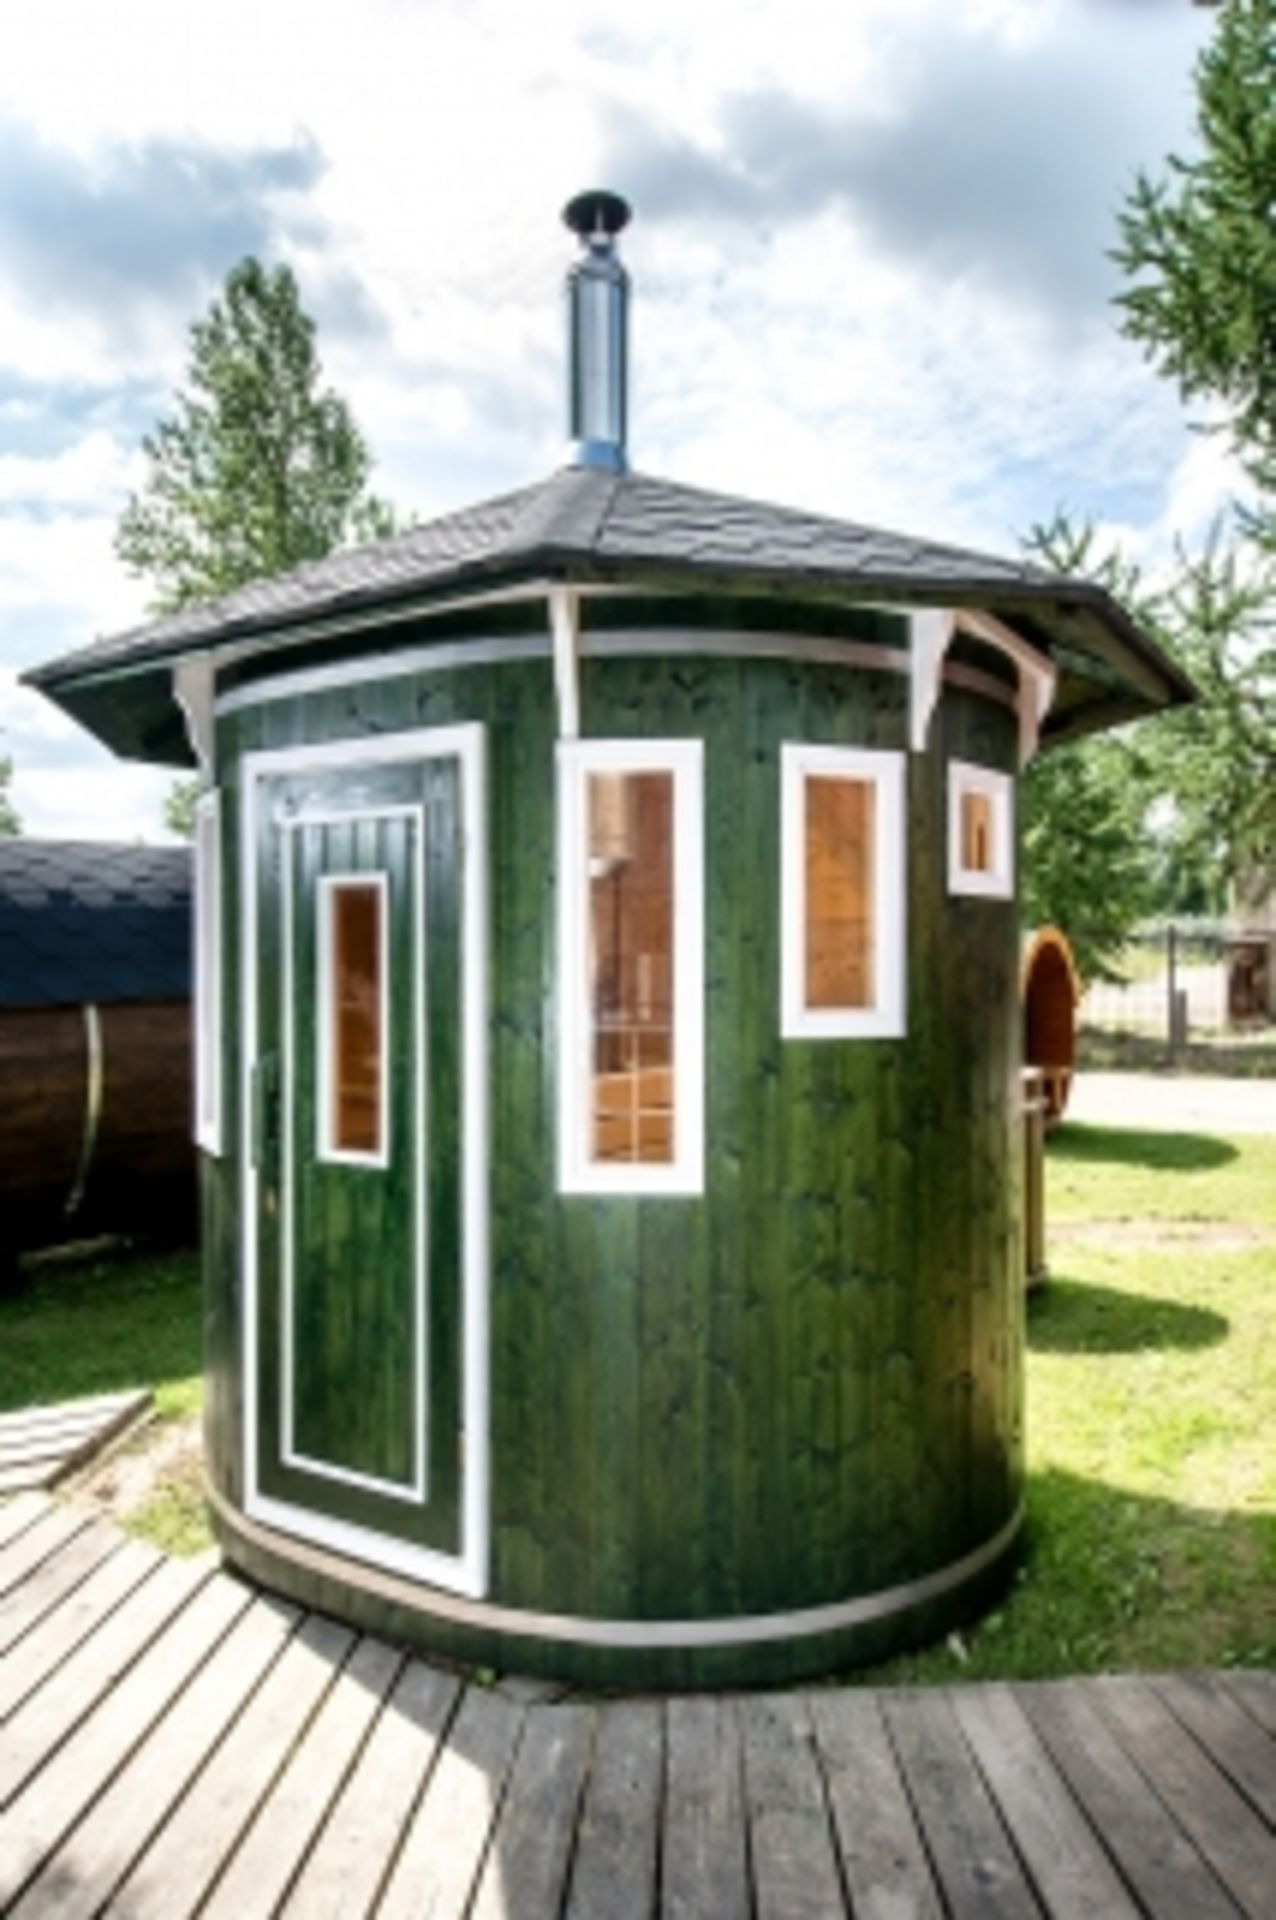 + VAT Brand New Vertical Sauna Made From Spruce Wood - Oval Shaped Sauna - Roof Covered With